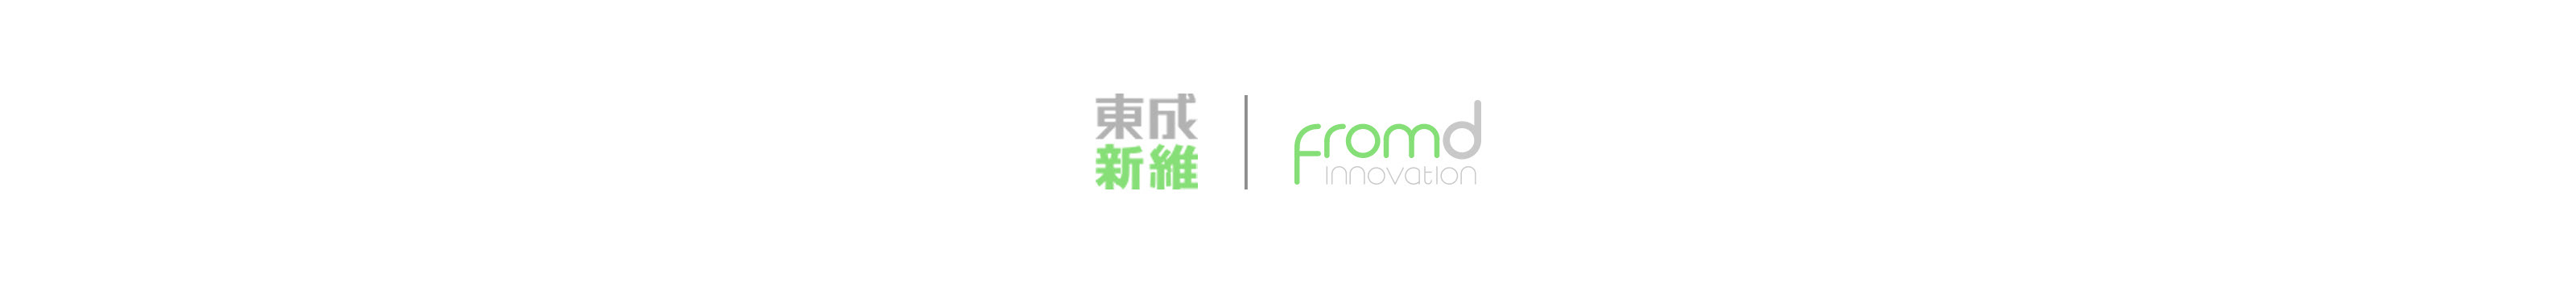 FromD Innovation 东成新维's profile banner